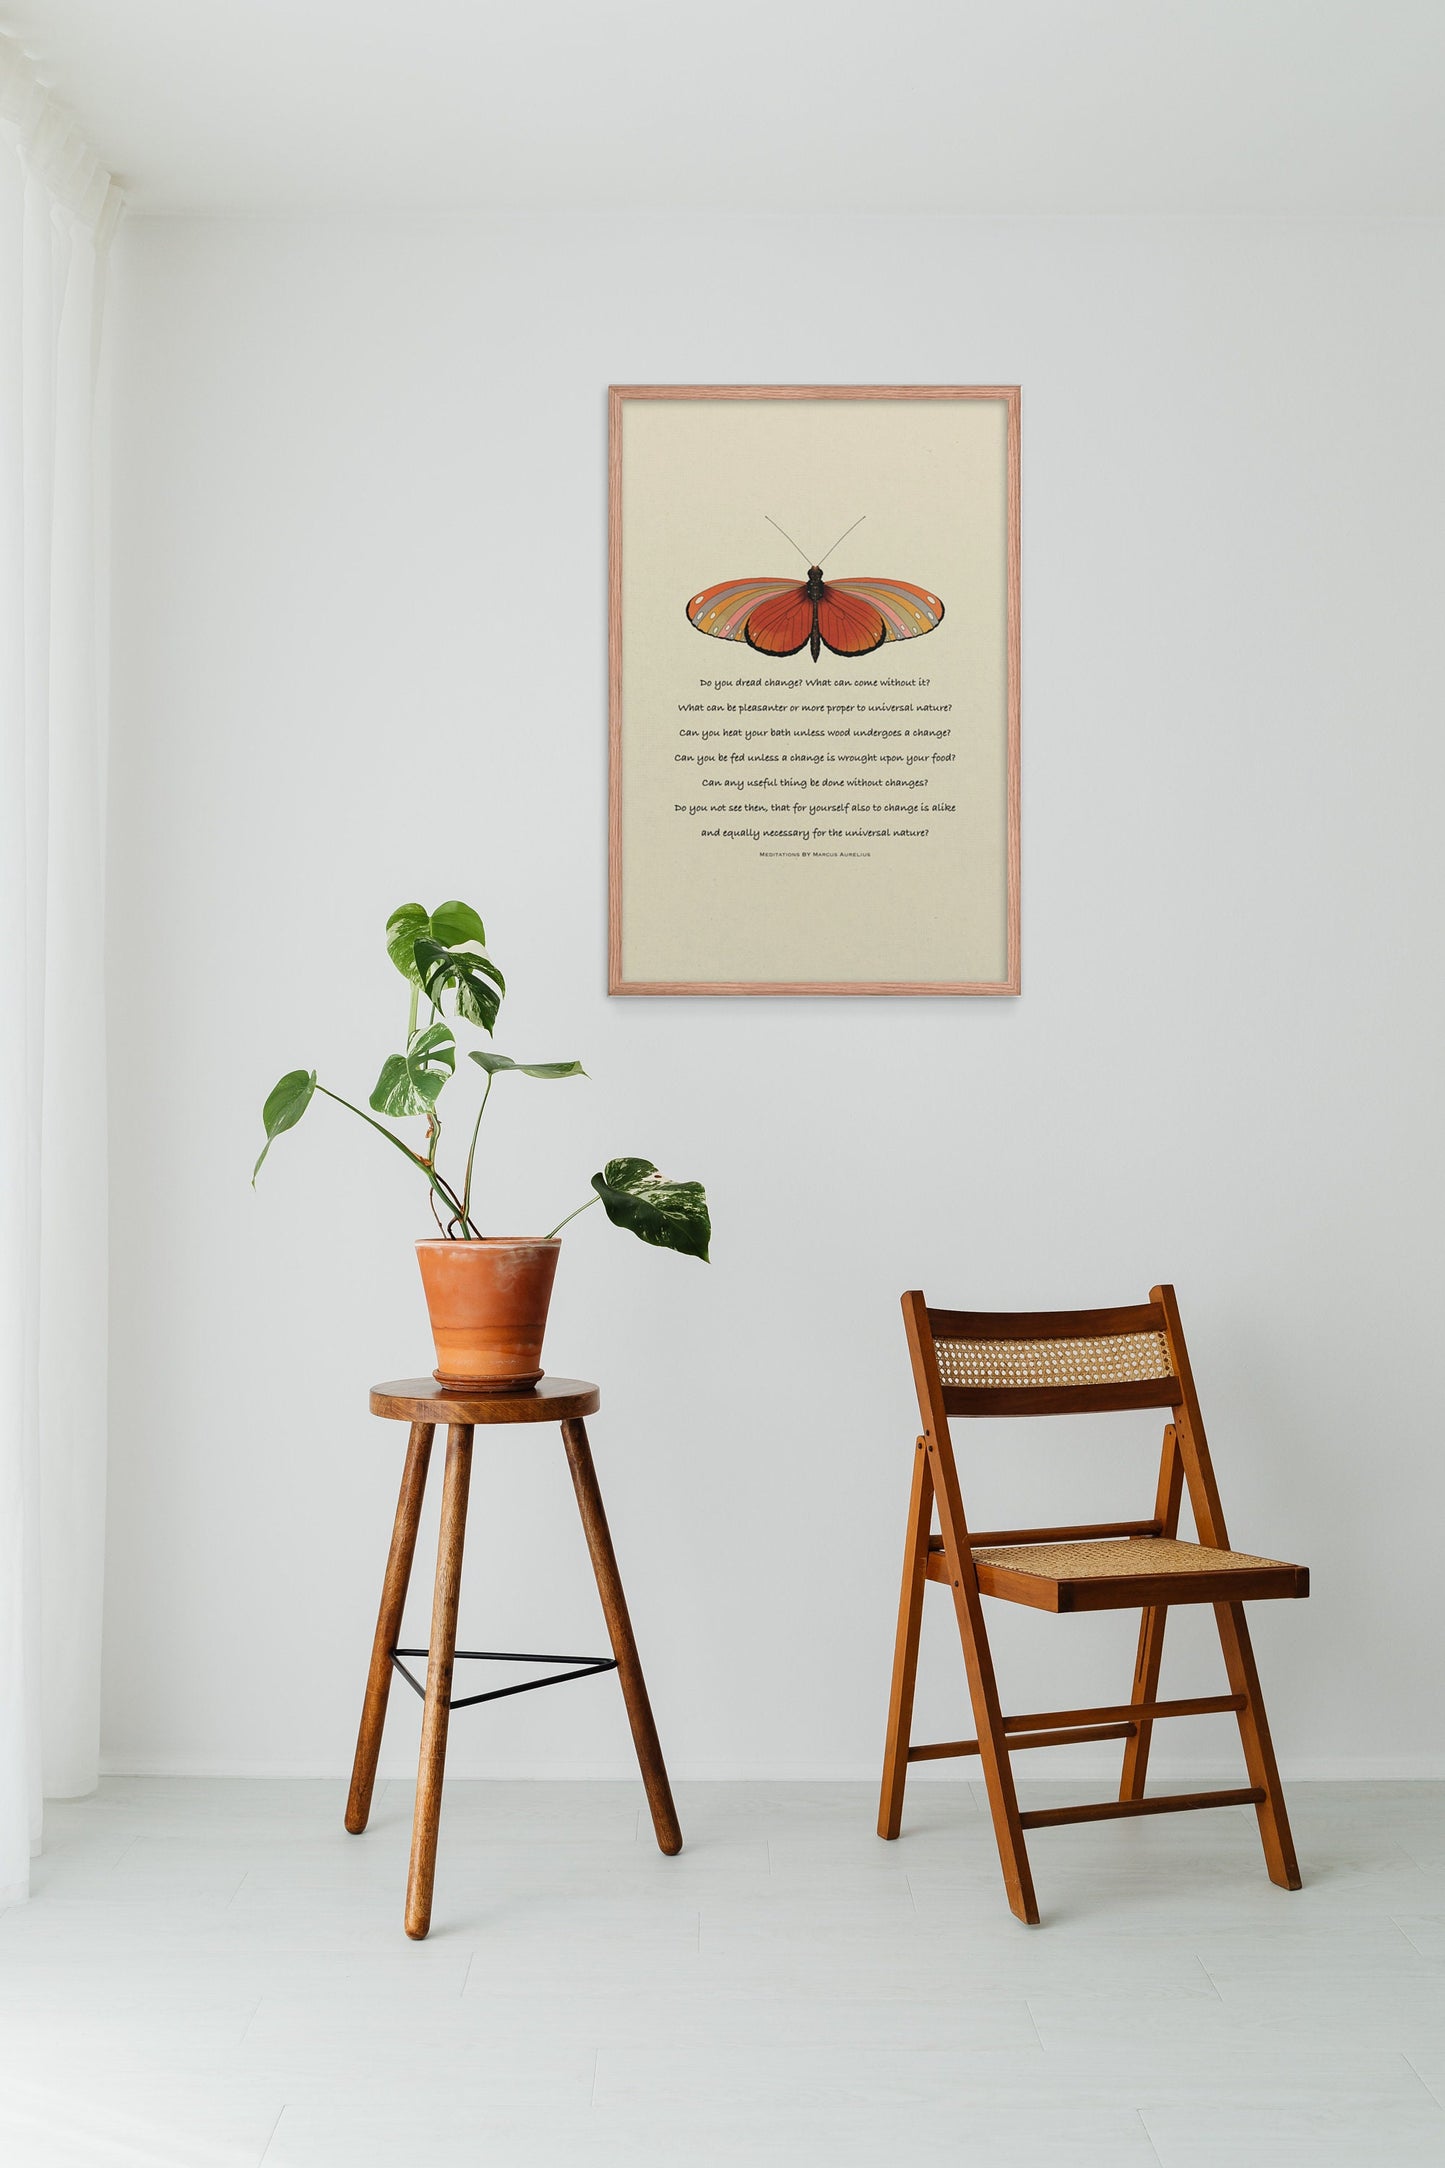 Stoic on change quote by marcus aurelius with a colorful butterfly art poster in oak wood  frame